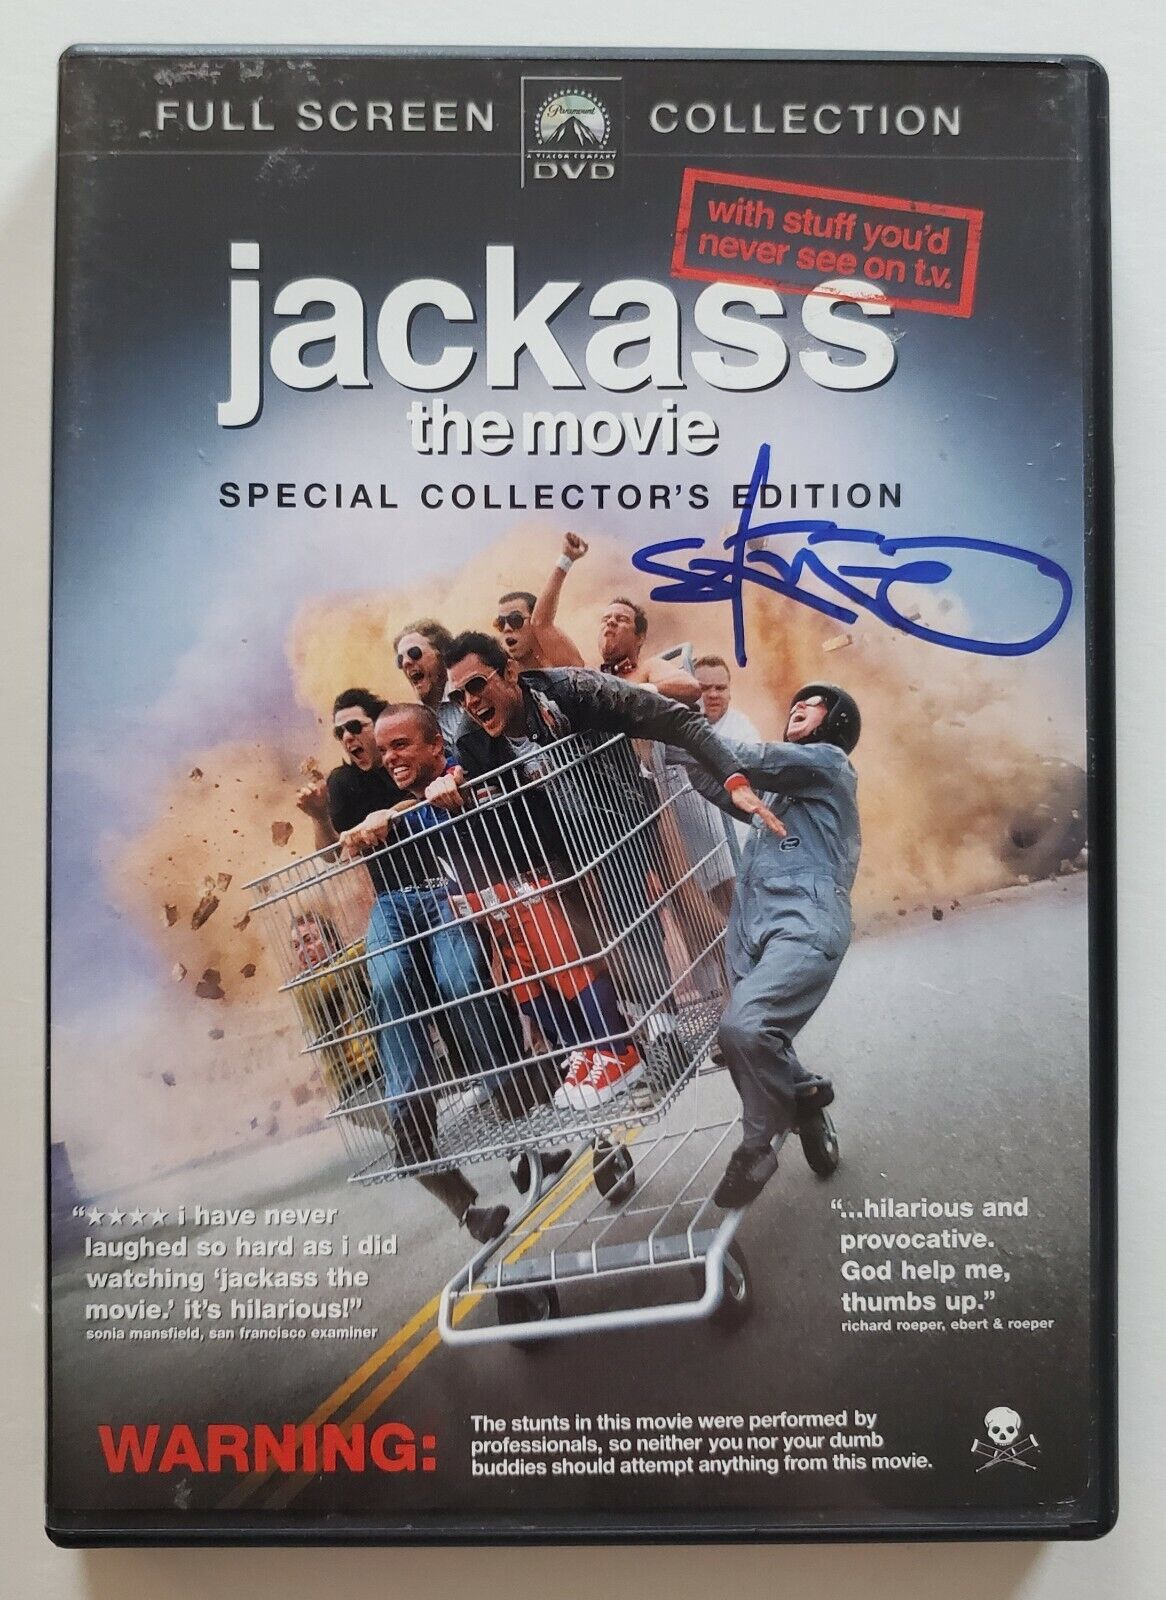 Steve-o Signed Jackass The Movie Dvd Actor Stand Up Comedy Legend Rad